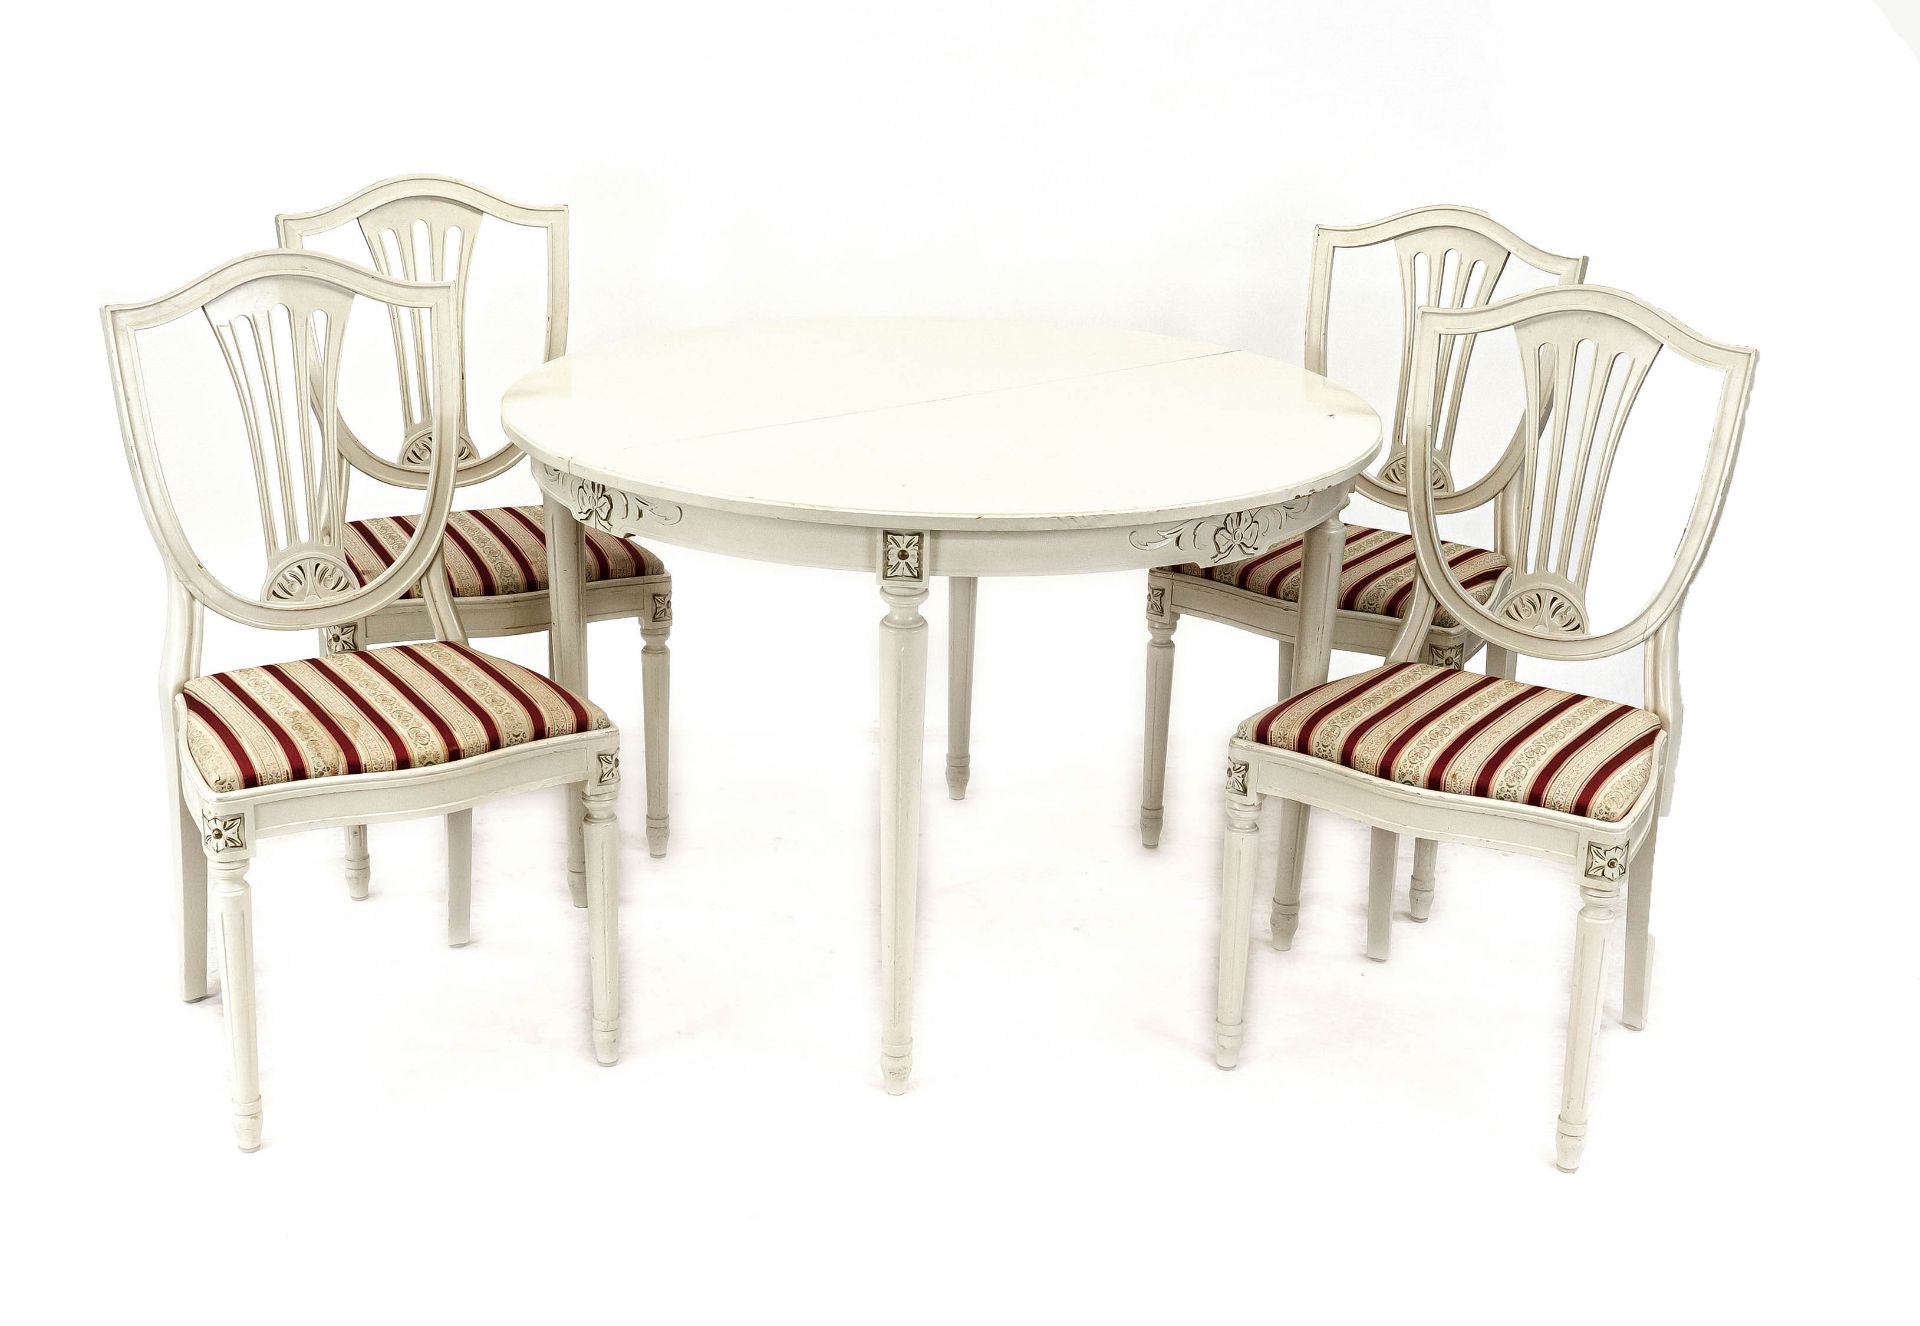 Gustavian-style seating ensemble, 20th century, consisting of table with four chairs, white